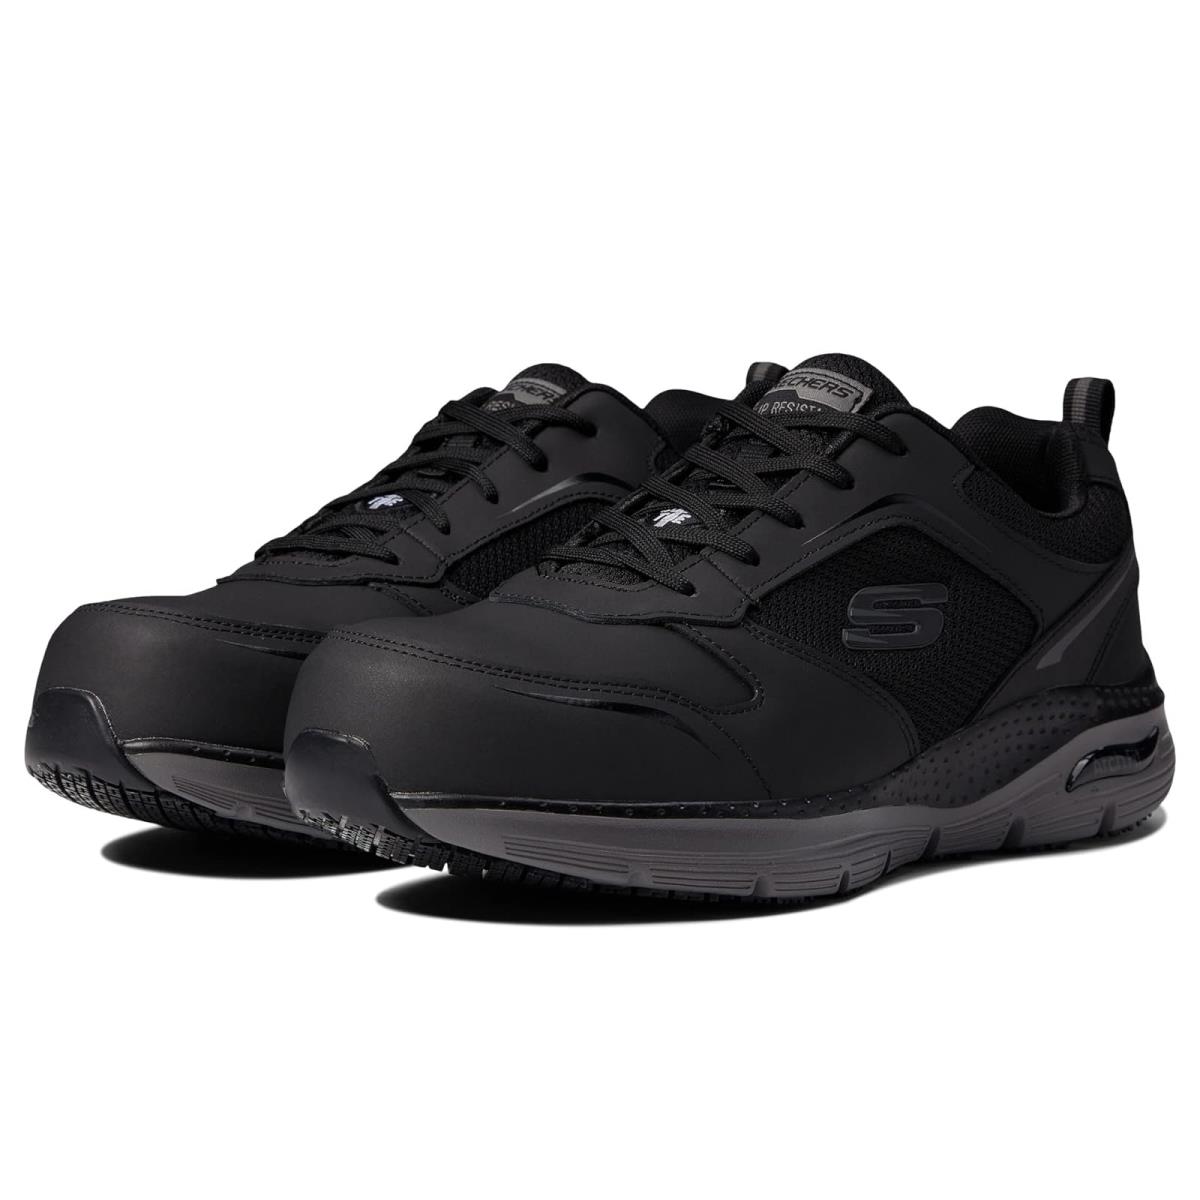 Man`s Sneakers Athletic Shoes Skechers Work Arch Fit SR Comp Toe Black/Charcoal